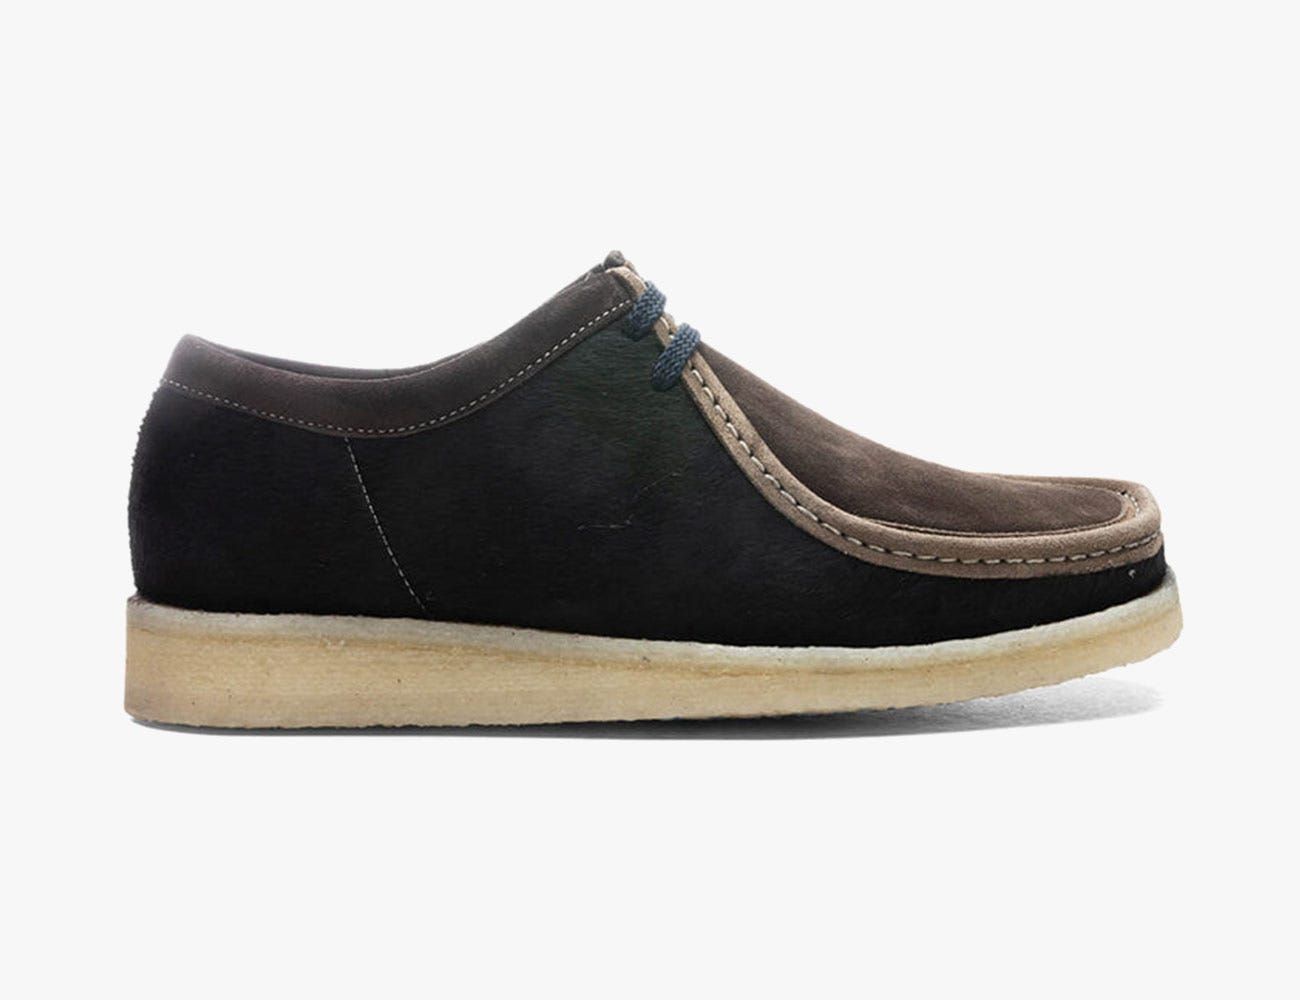 These Bold Look Like Clarks, But They